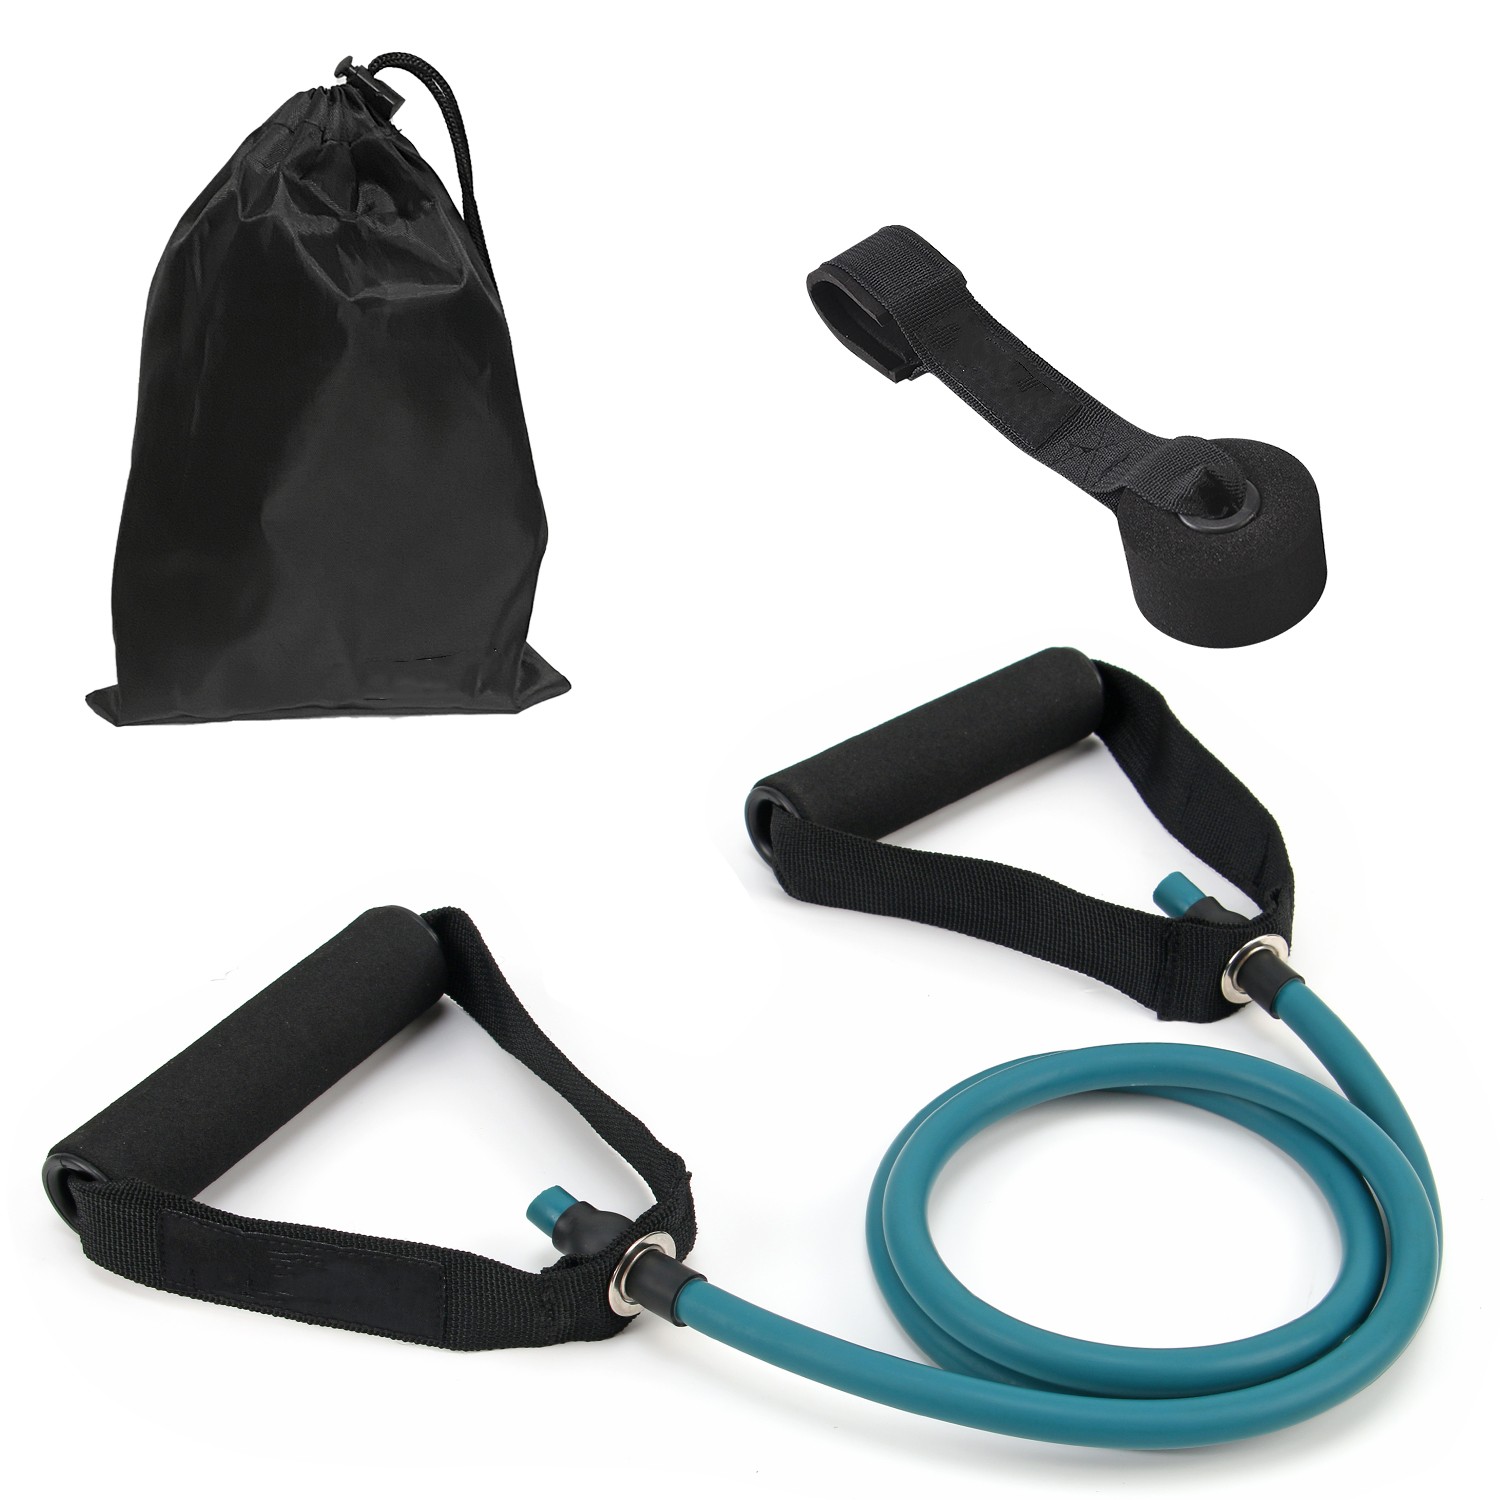 40 LBS SINGLE RESISTANCE EXERCISE BANDS